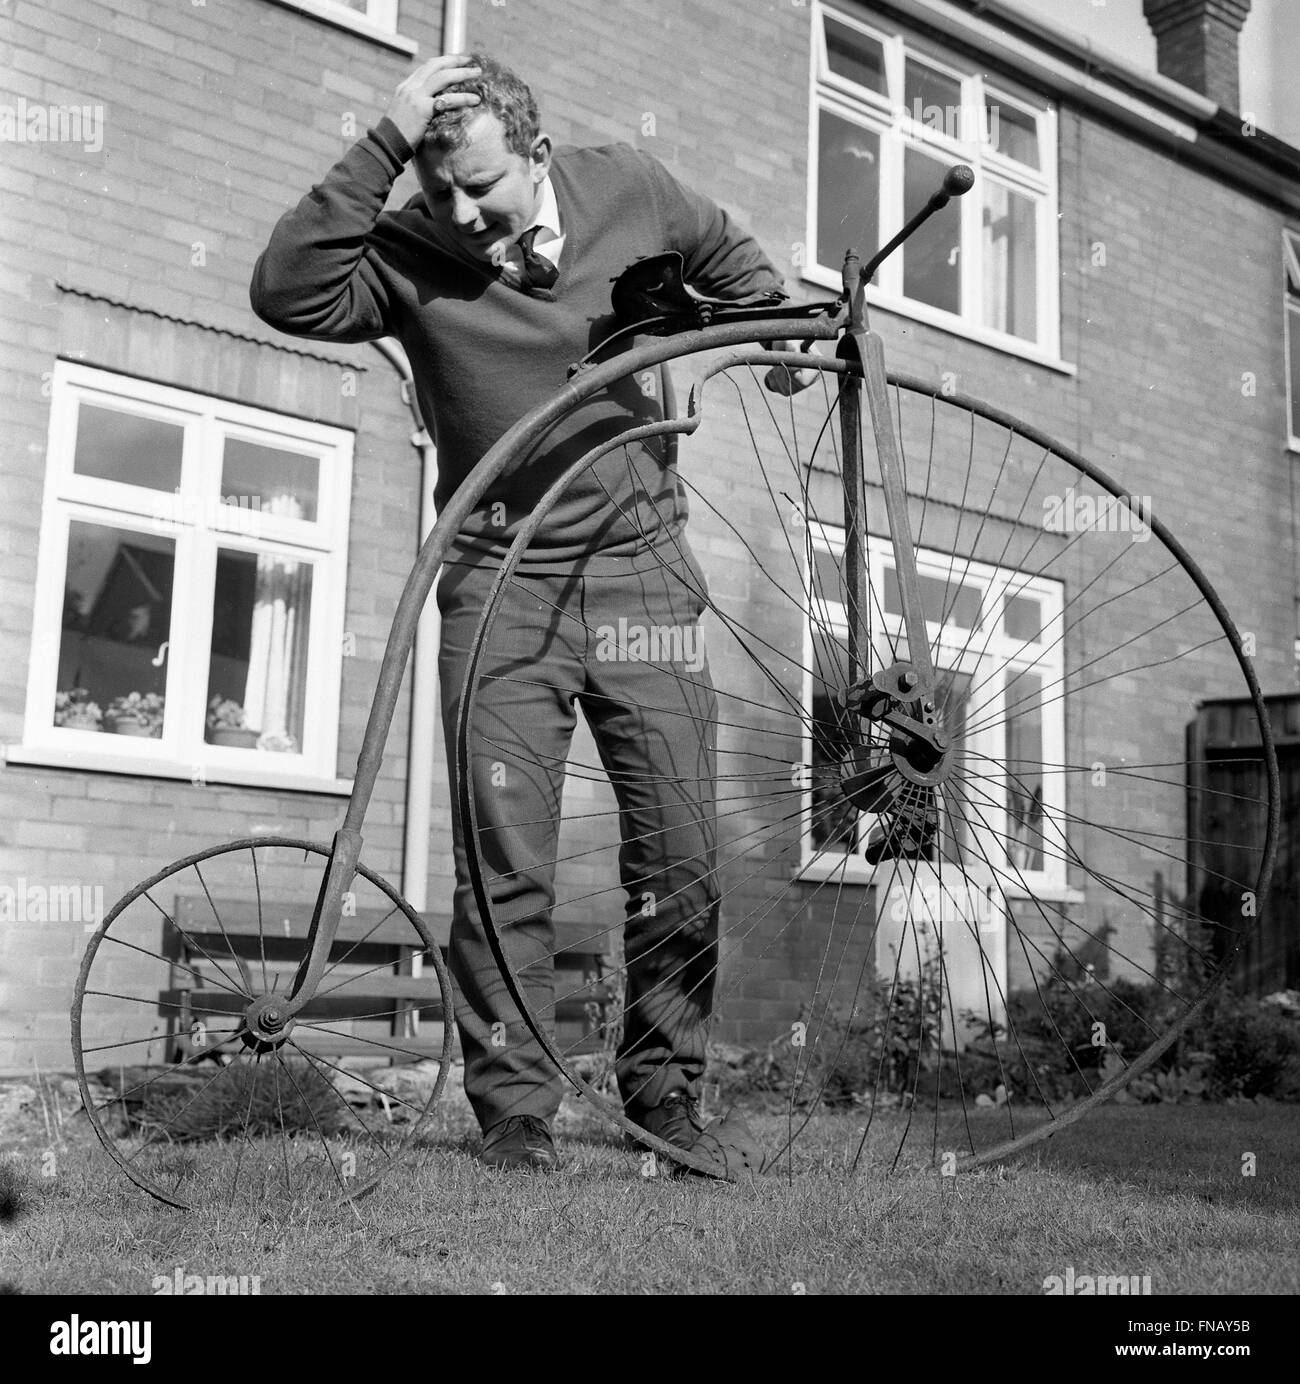 Man with penny farthing bicycle in need of repair with a buckled wheel 1960s Stock Photo